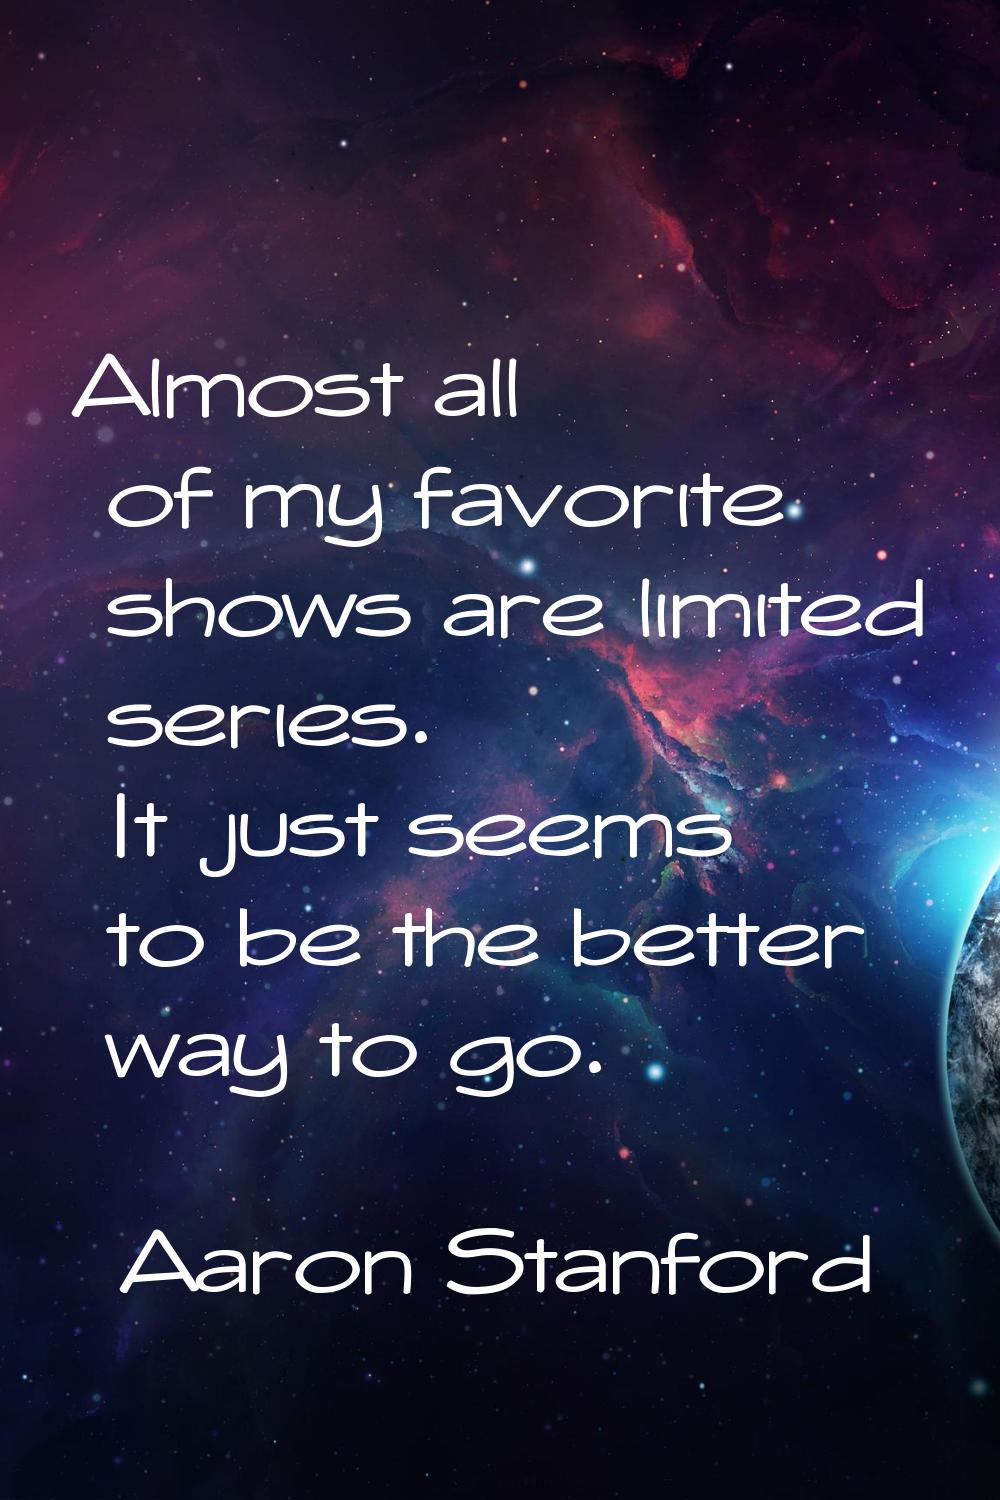 Almost all of my favorite shows are limited series. It just seems to be the better way to go.